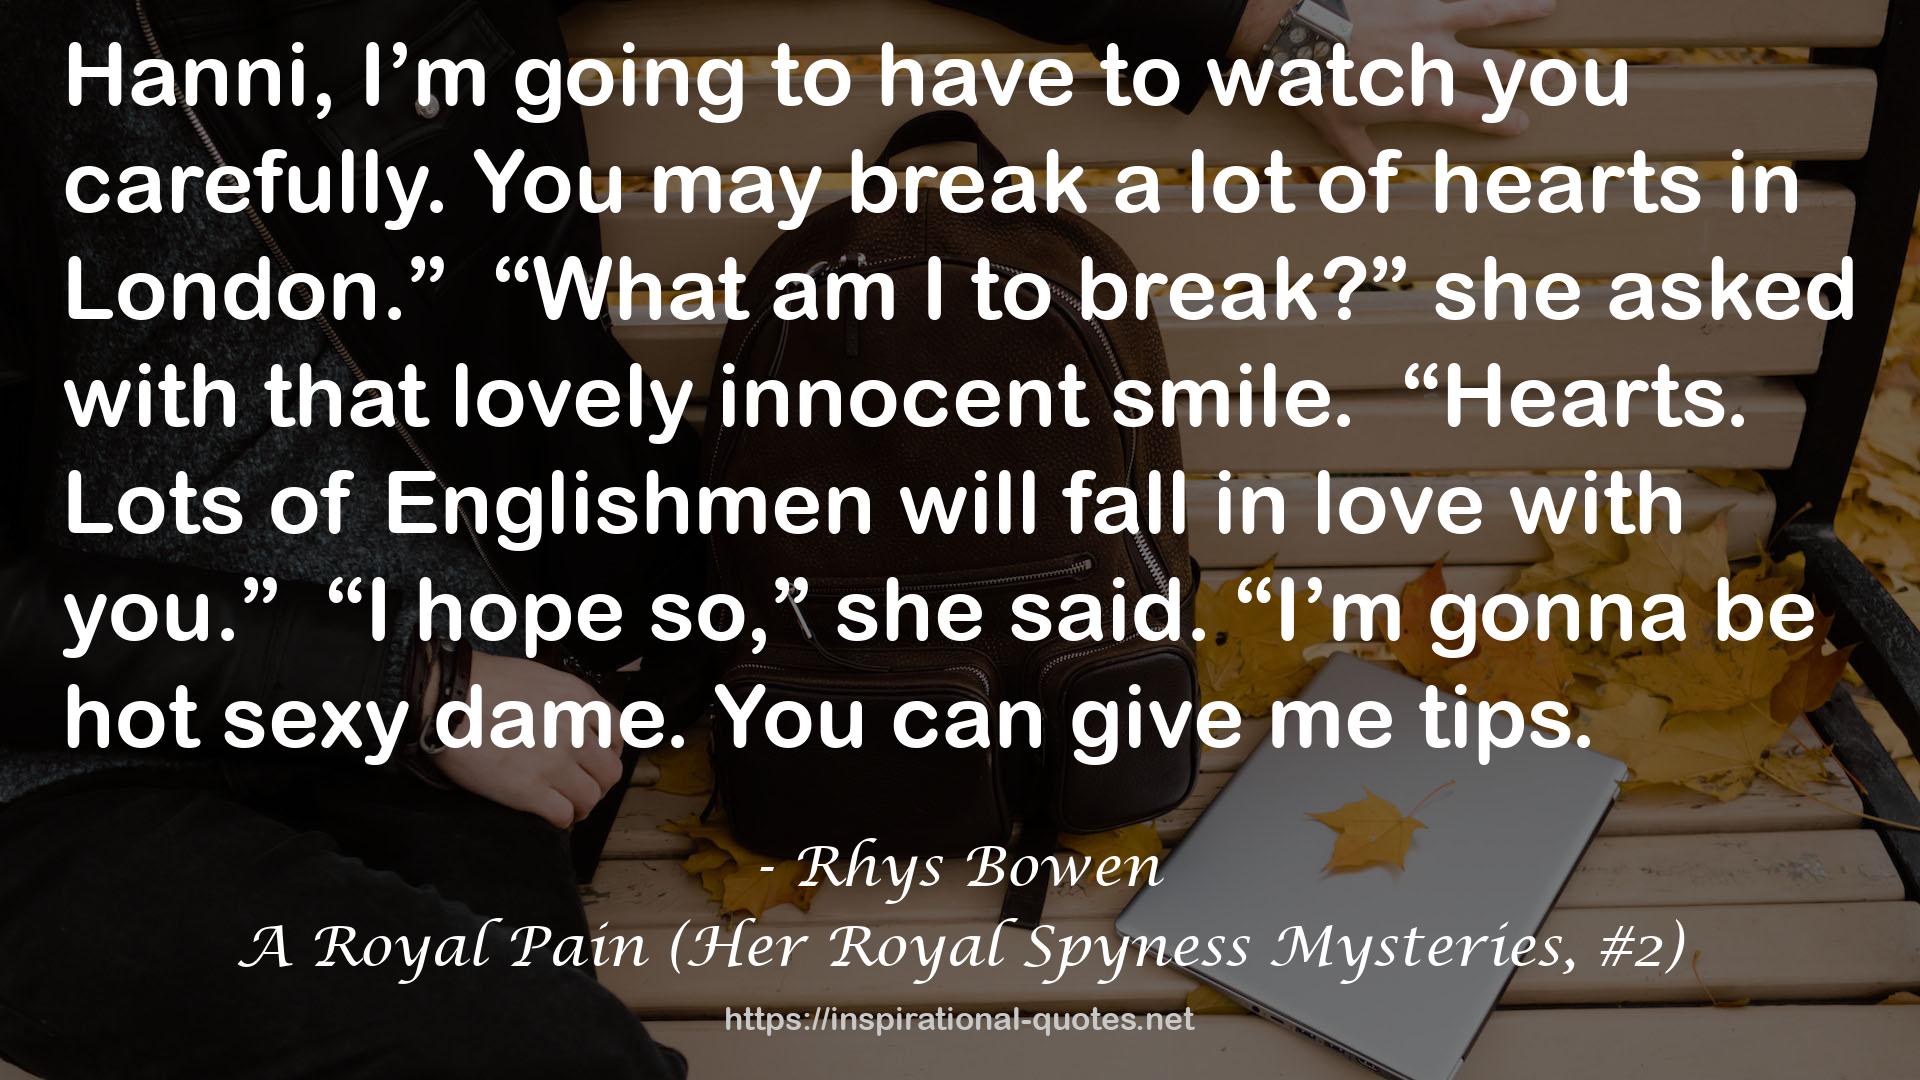 A Royal Pain (Her Royal Spyness Mysteries, #2) QUOTES